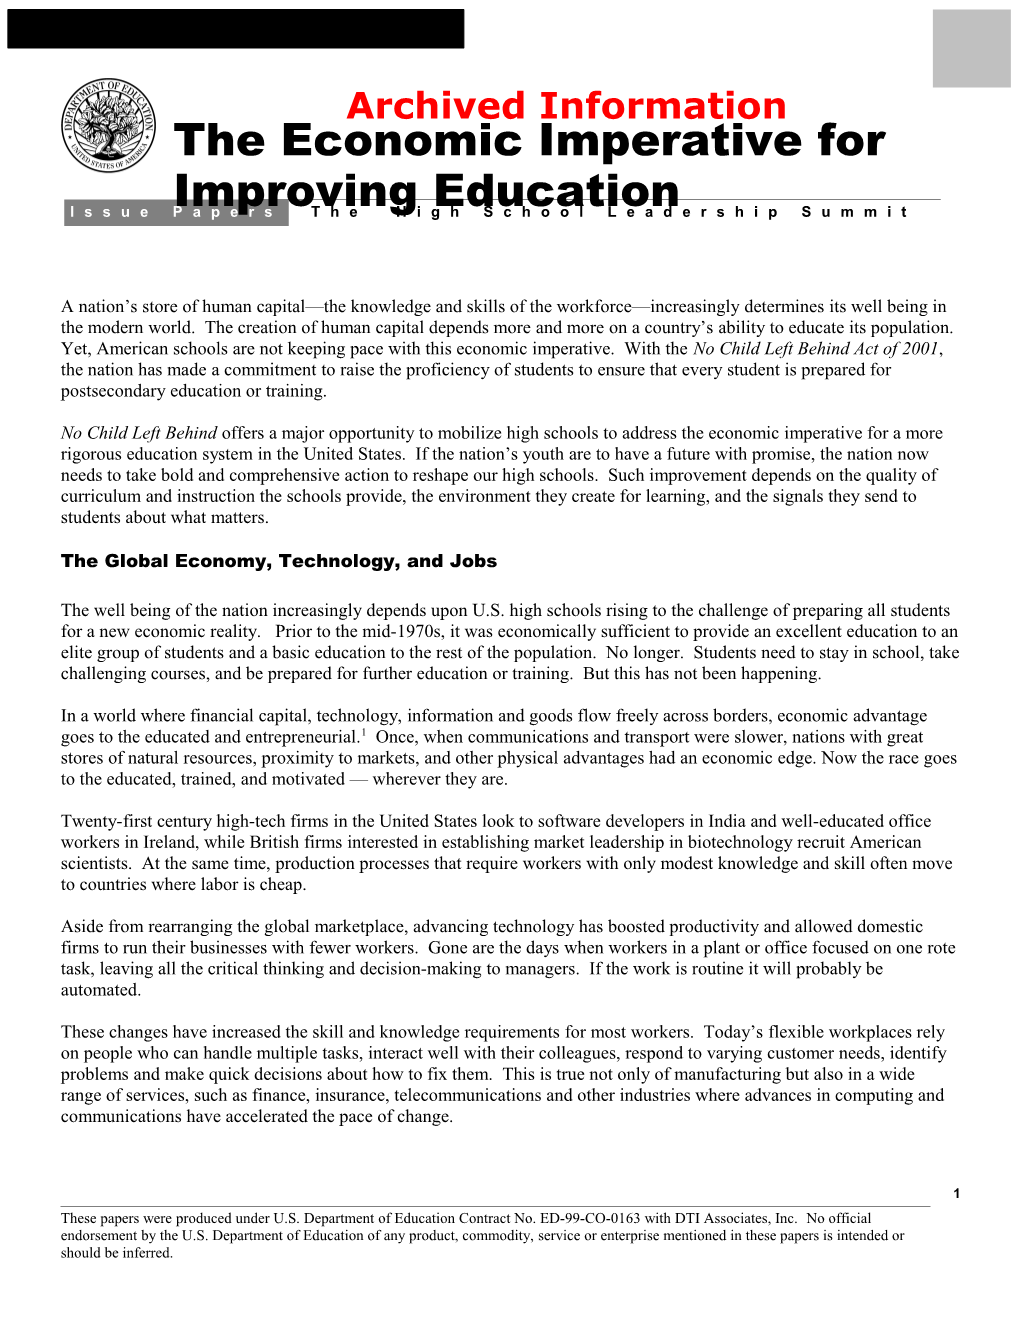 Archived: the High School Leadership Summit Issue Papers: the Economic Imperative for Improving